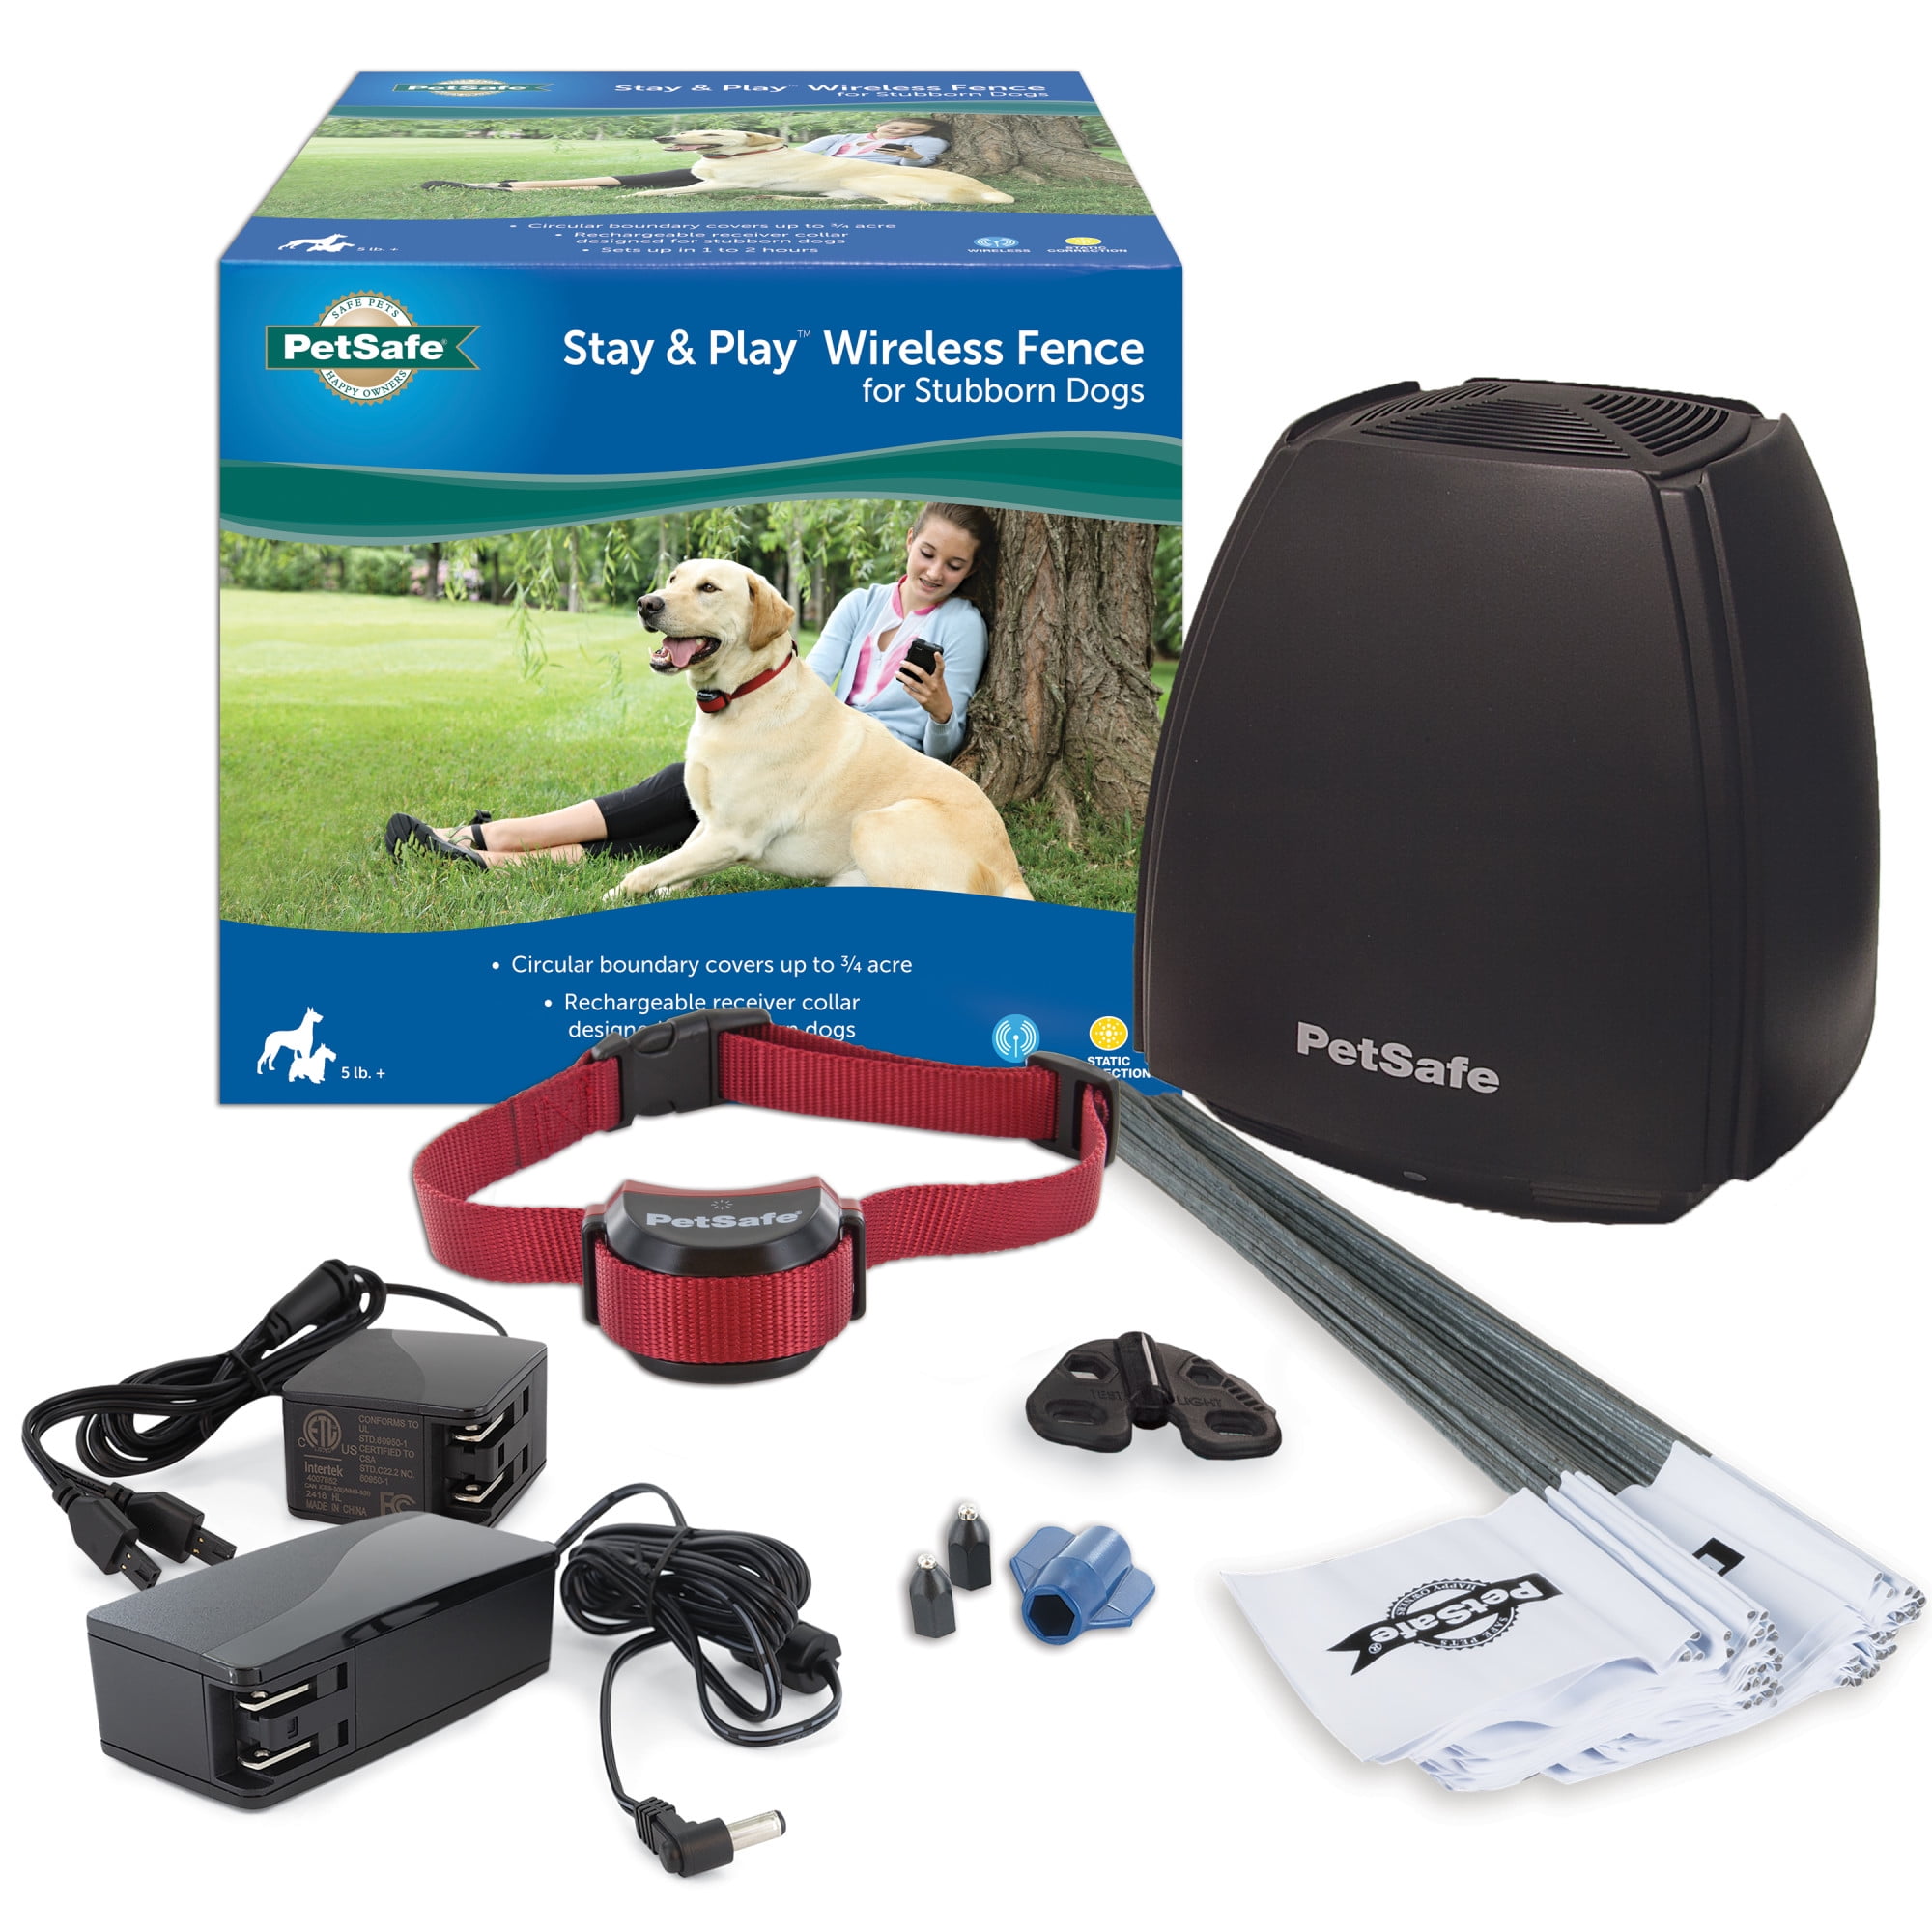 above ground electric dog fence